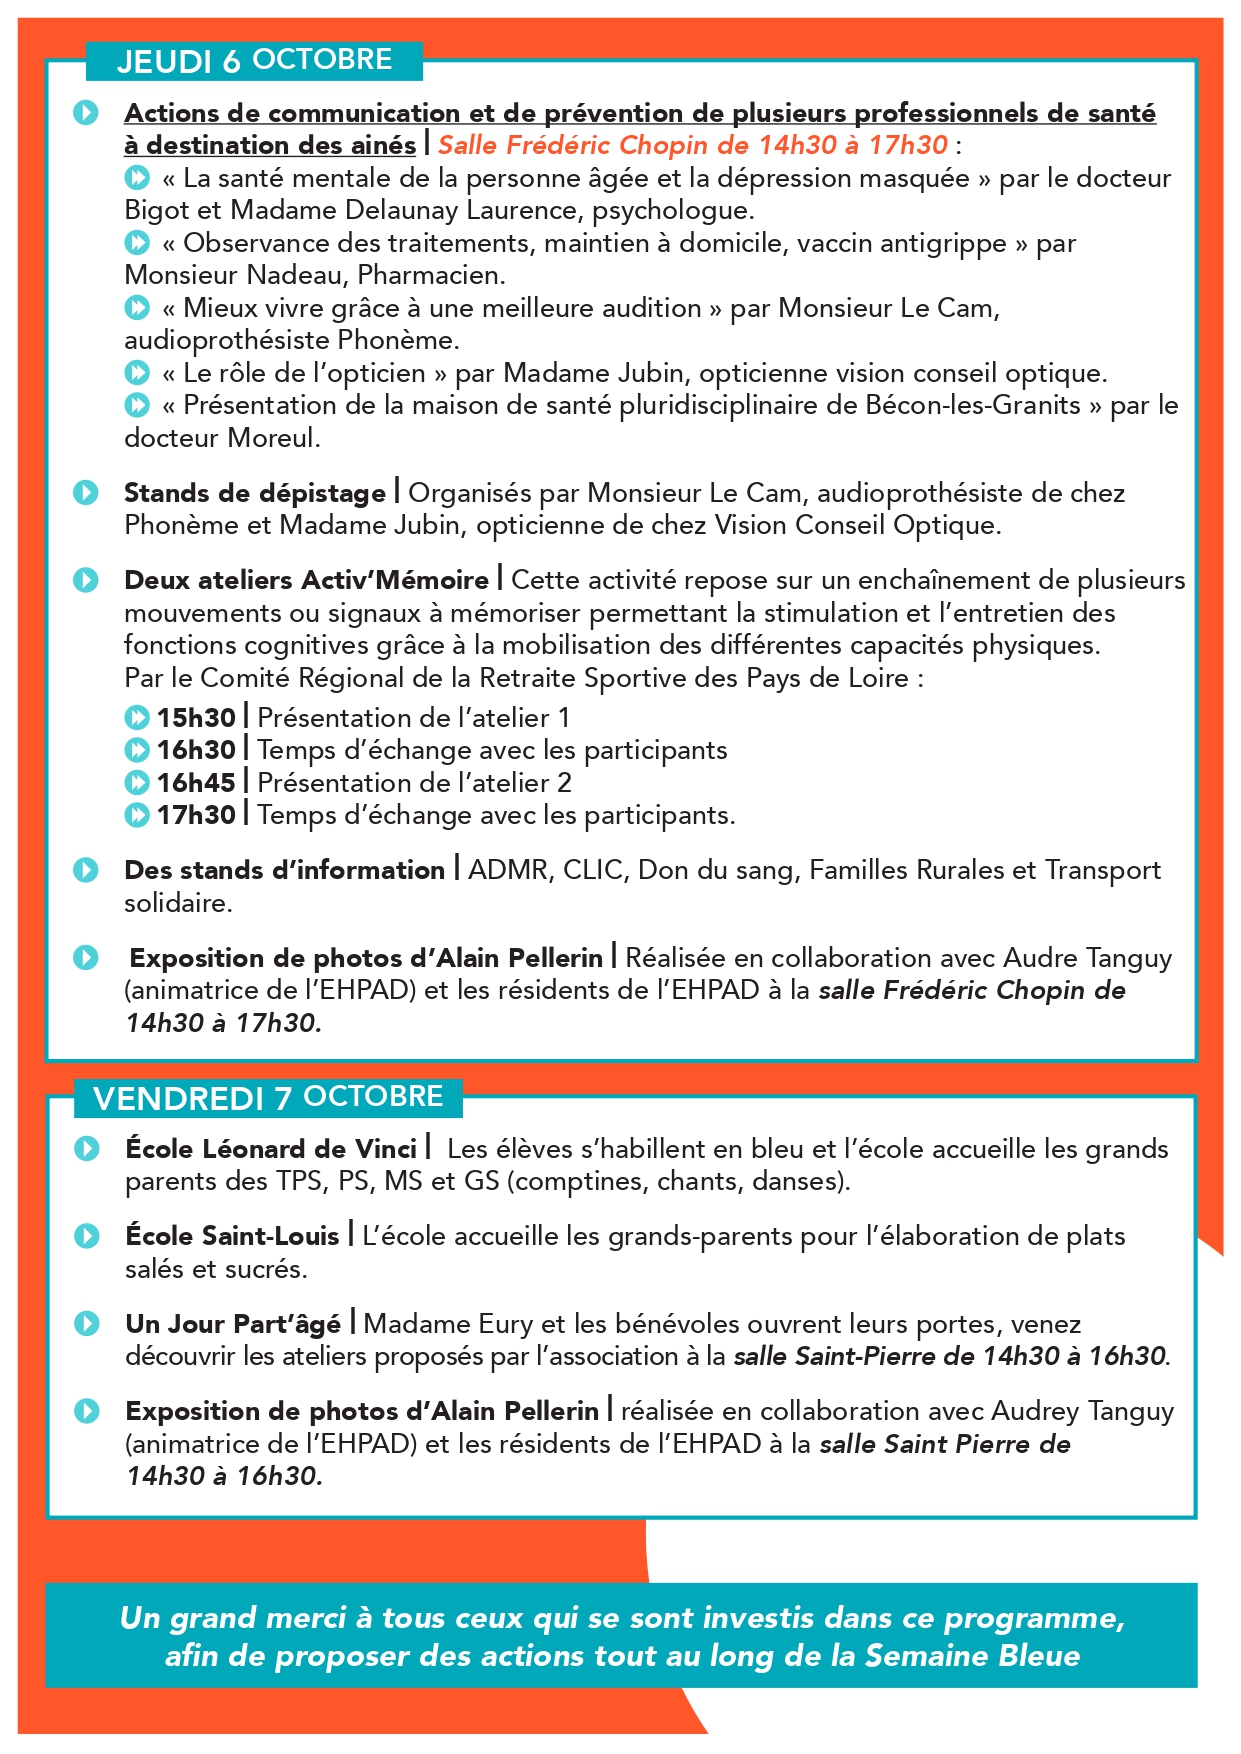 programme semaine bleue 2022_page-0003.jpg